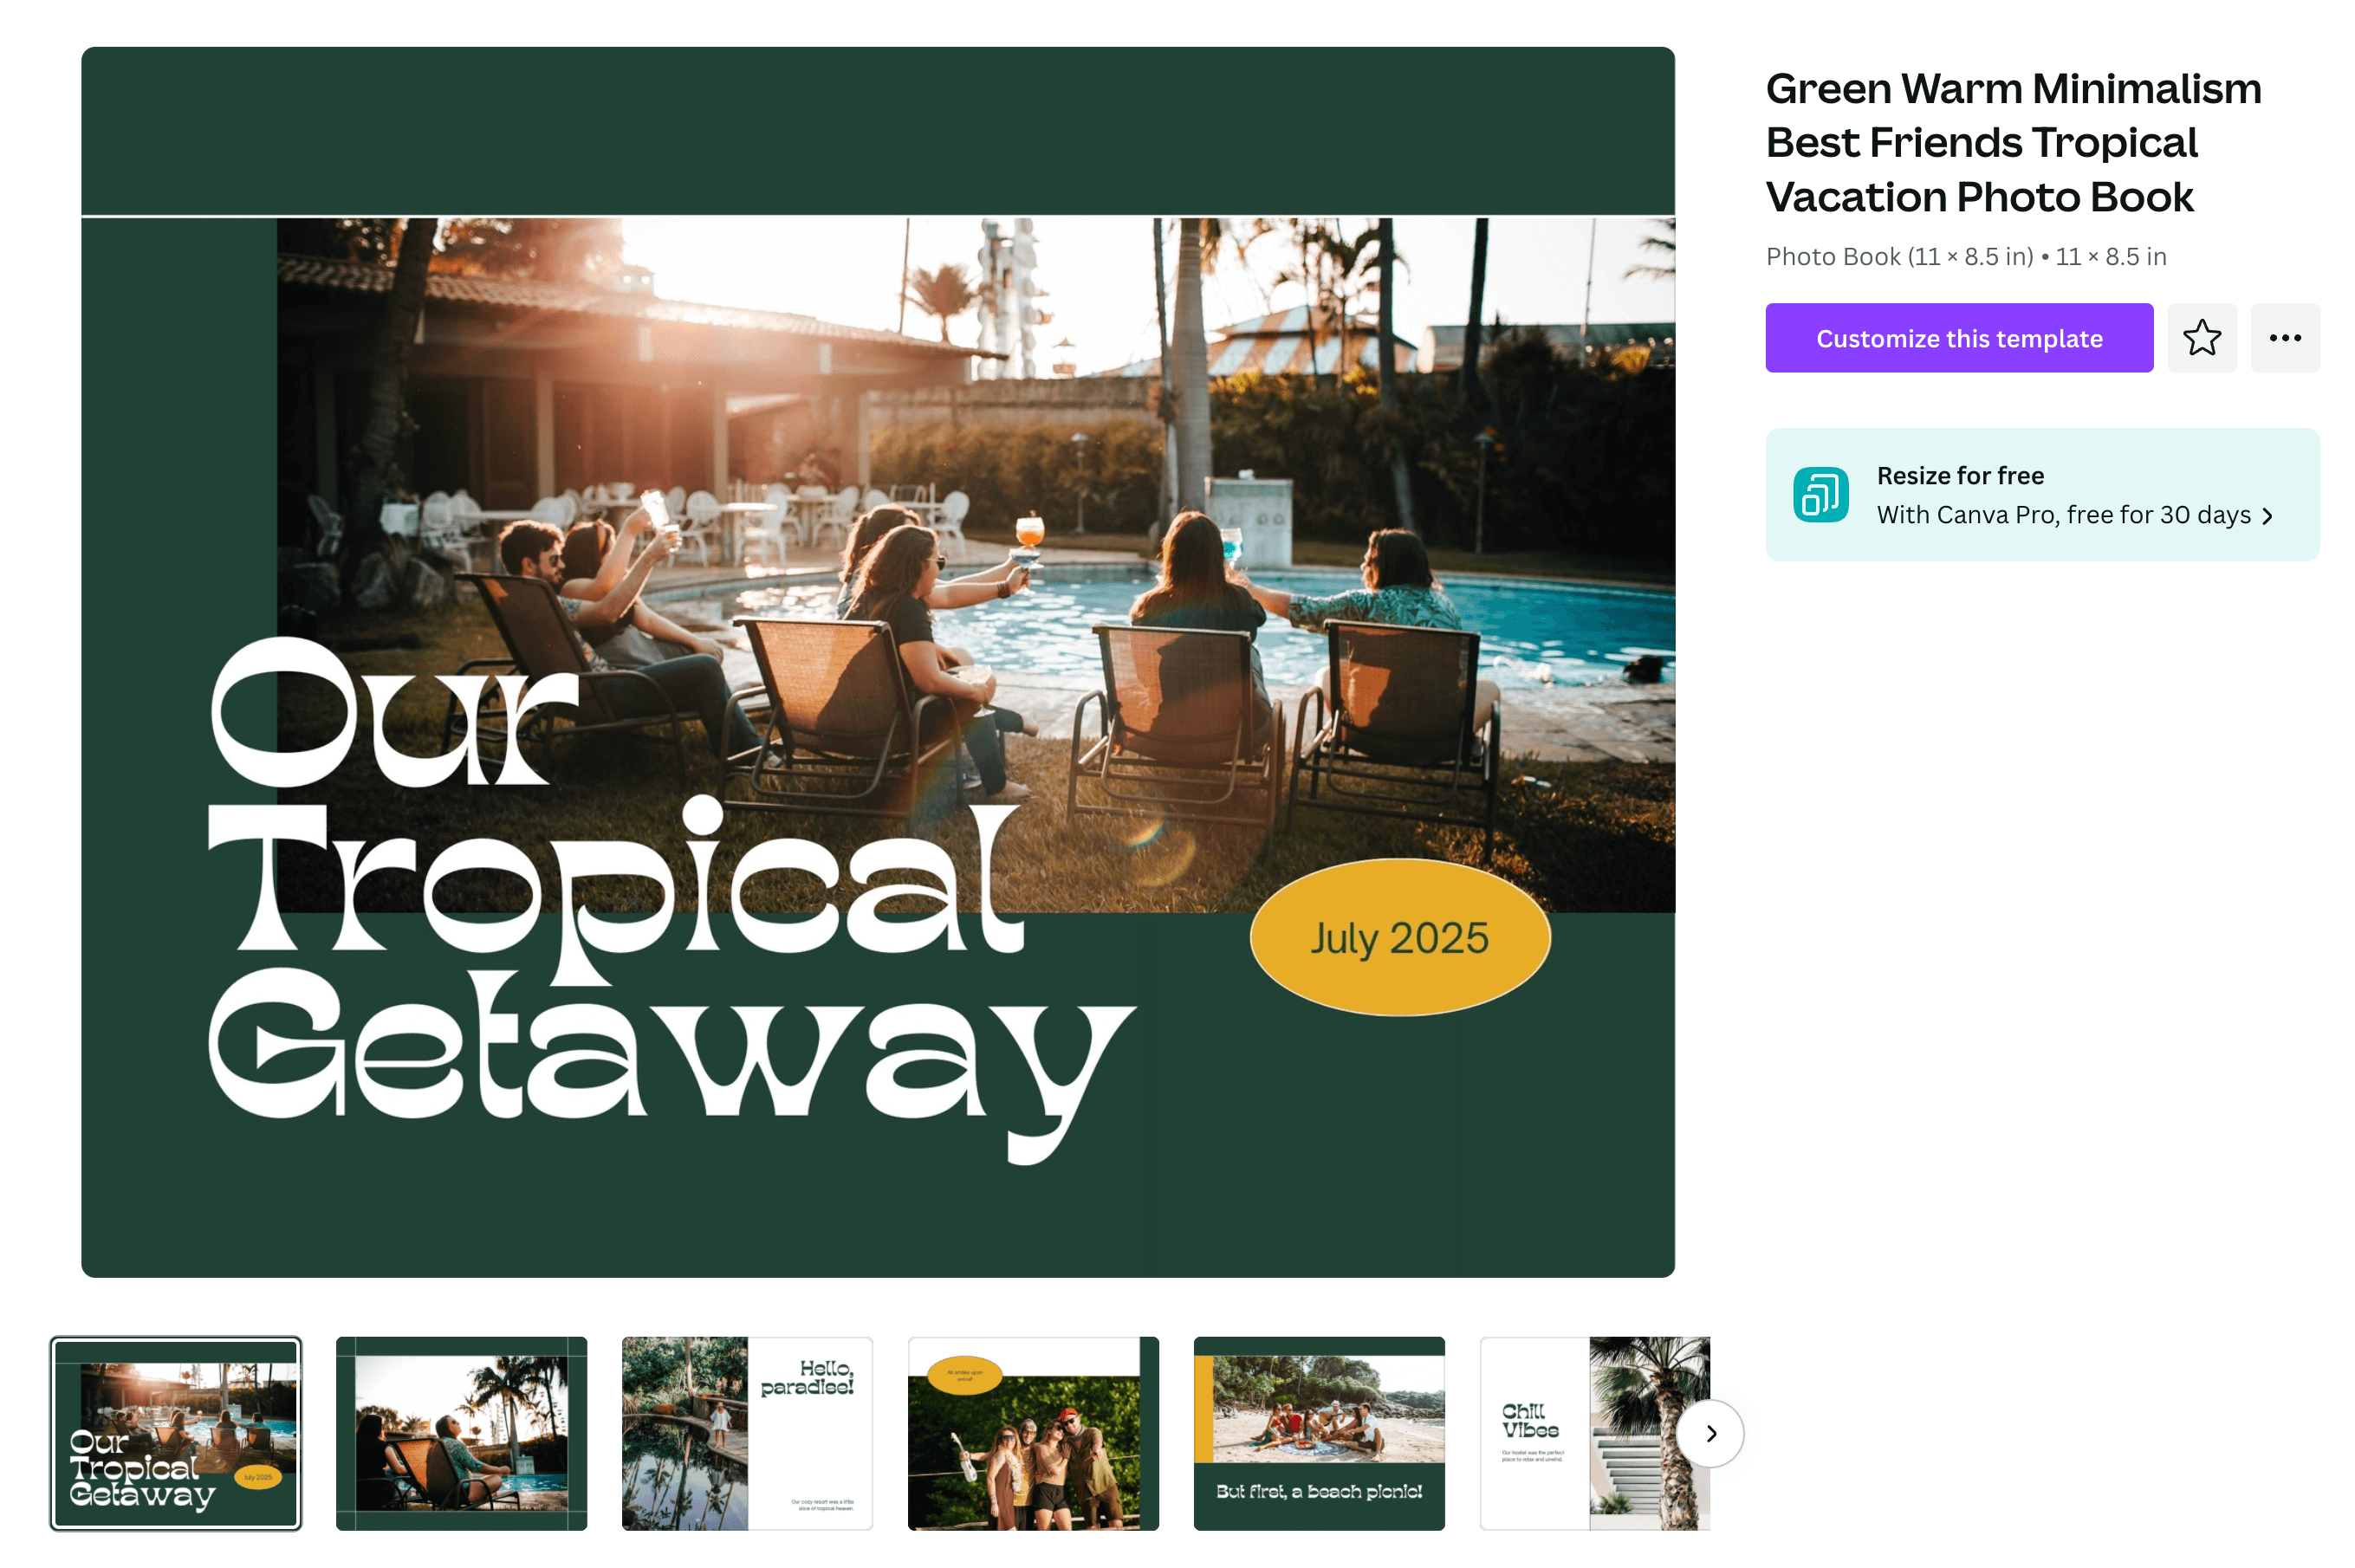 A retro-style photo book titled "Our Tropical Getaway"